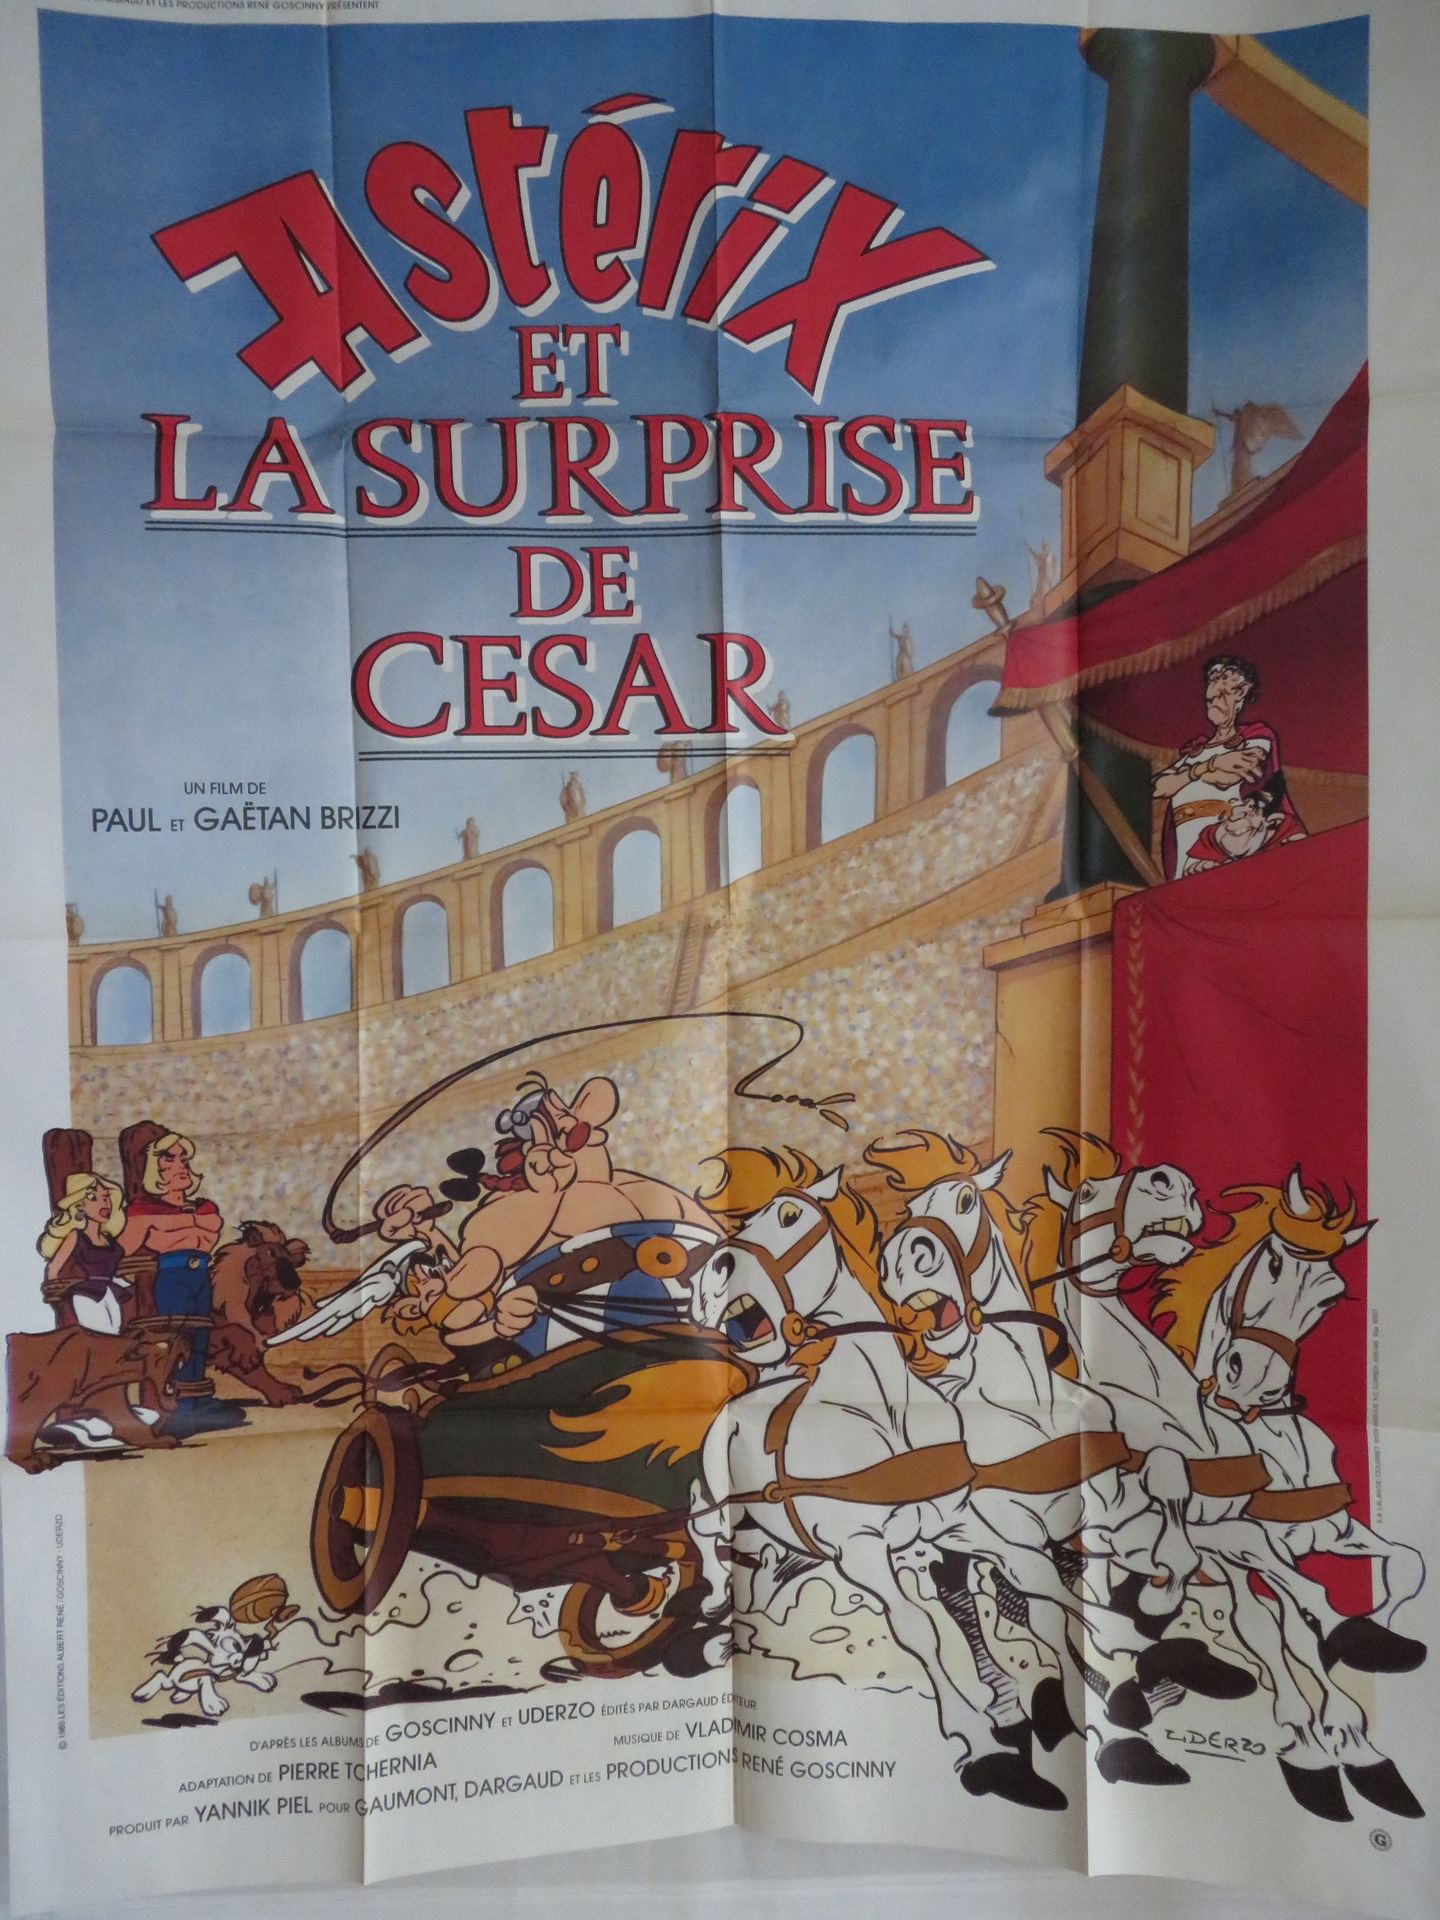 Null "ASTERIX AND THE SURPRISE OF CESAR" (1985) by Paul and Gaétan BRIZZI - afte&hellip;